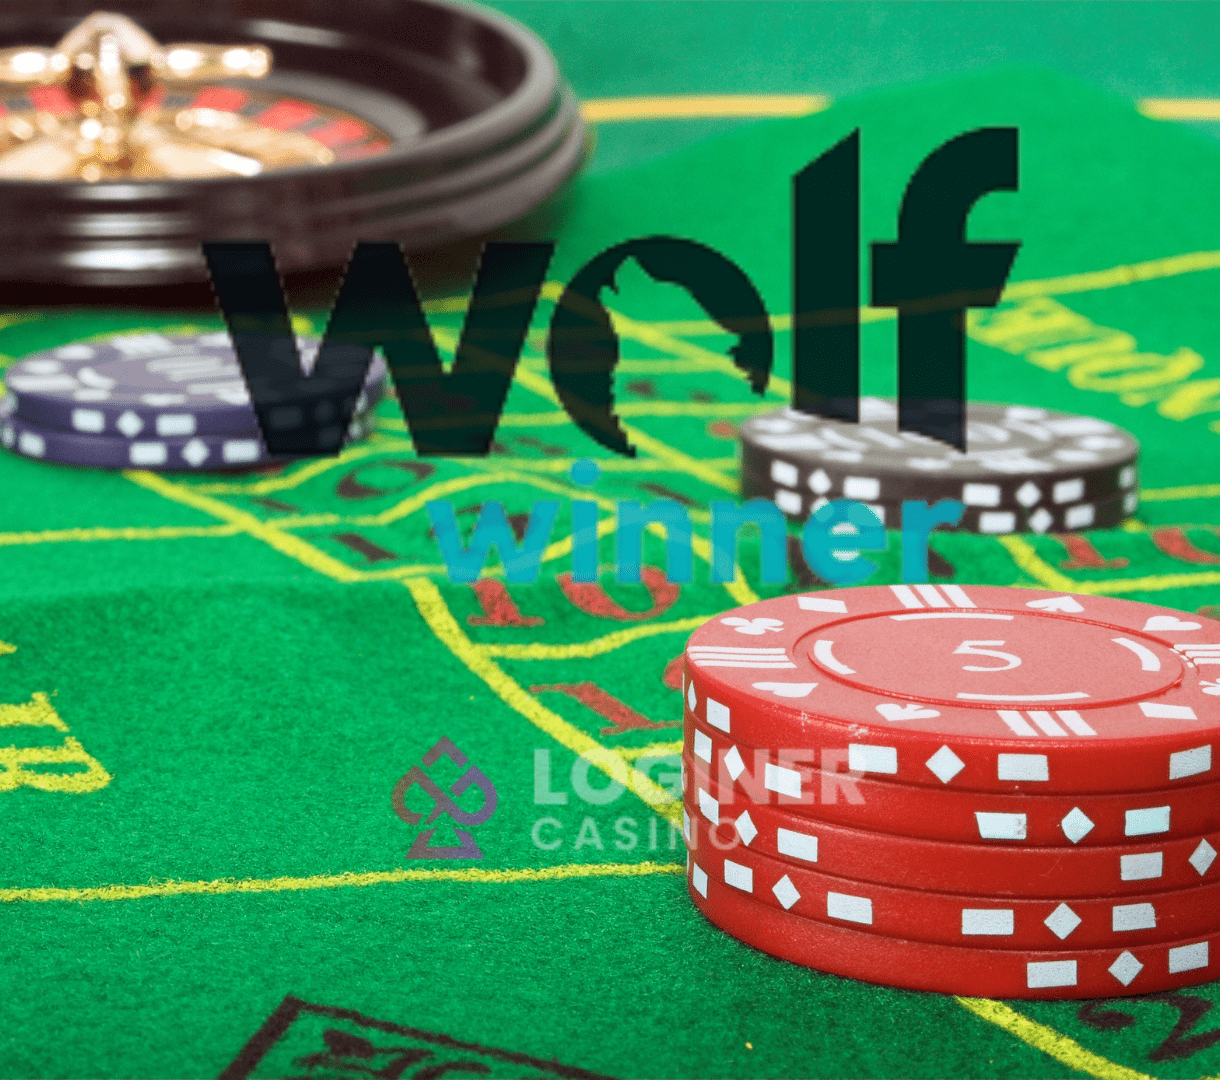 What's the point of playing online Wolf Winner Casino games for money?